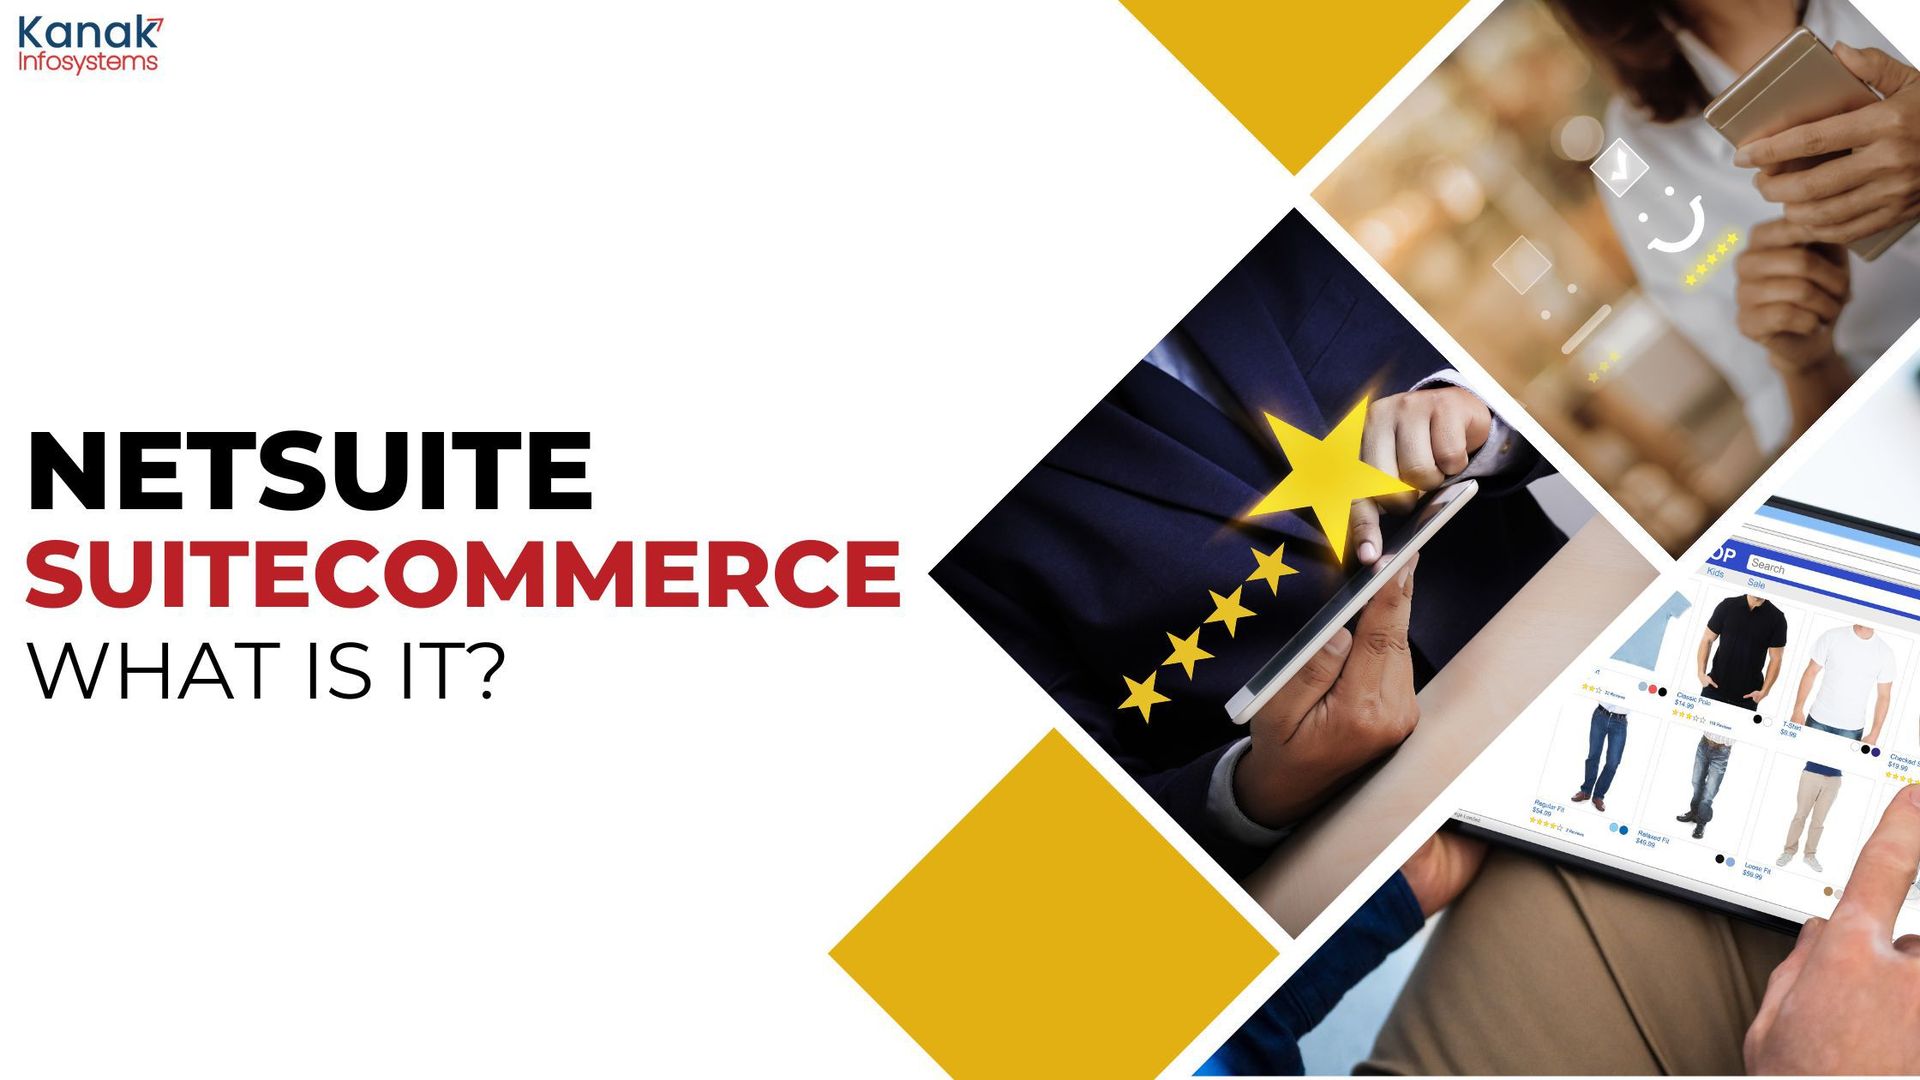 NetSuite Suitecommerce What is it